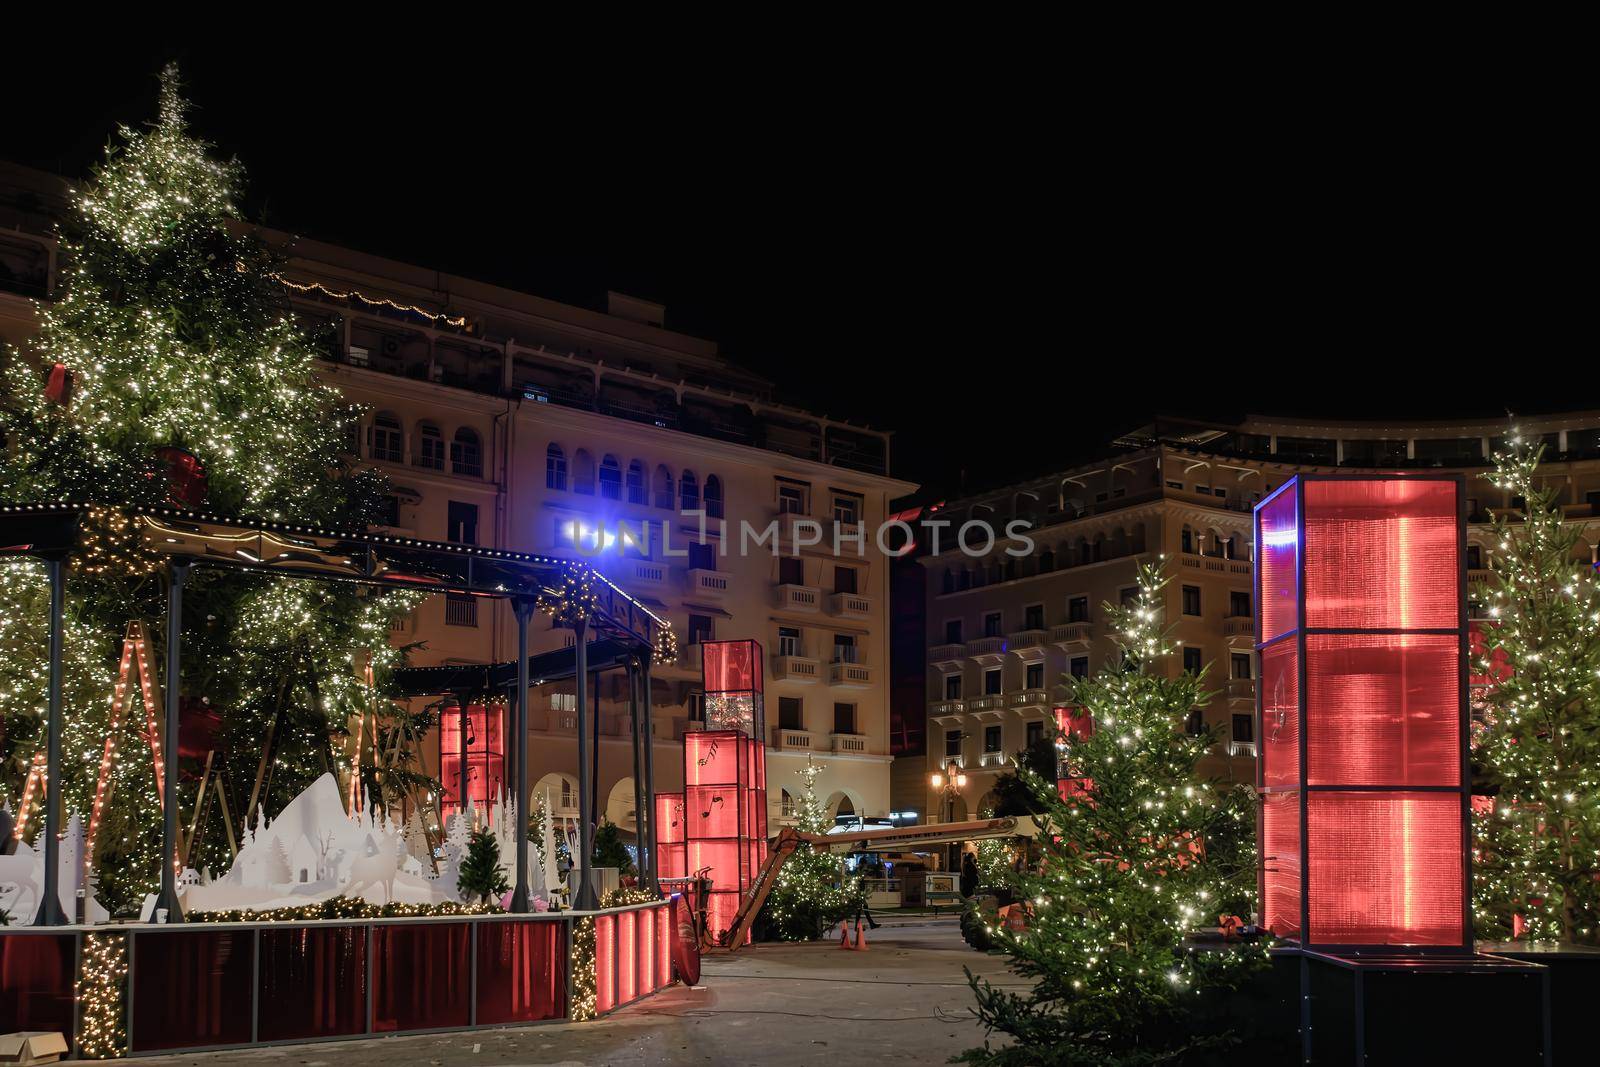 Night view of festive instalments at the southern part of main city square.